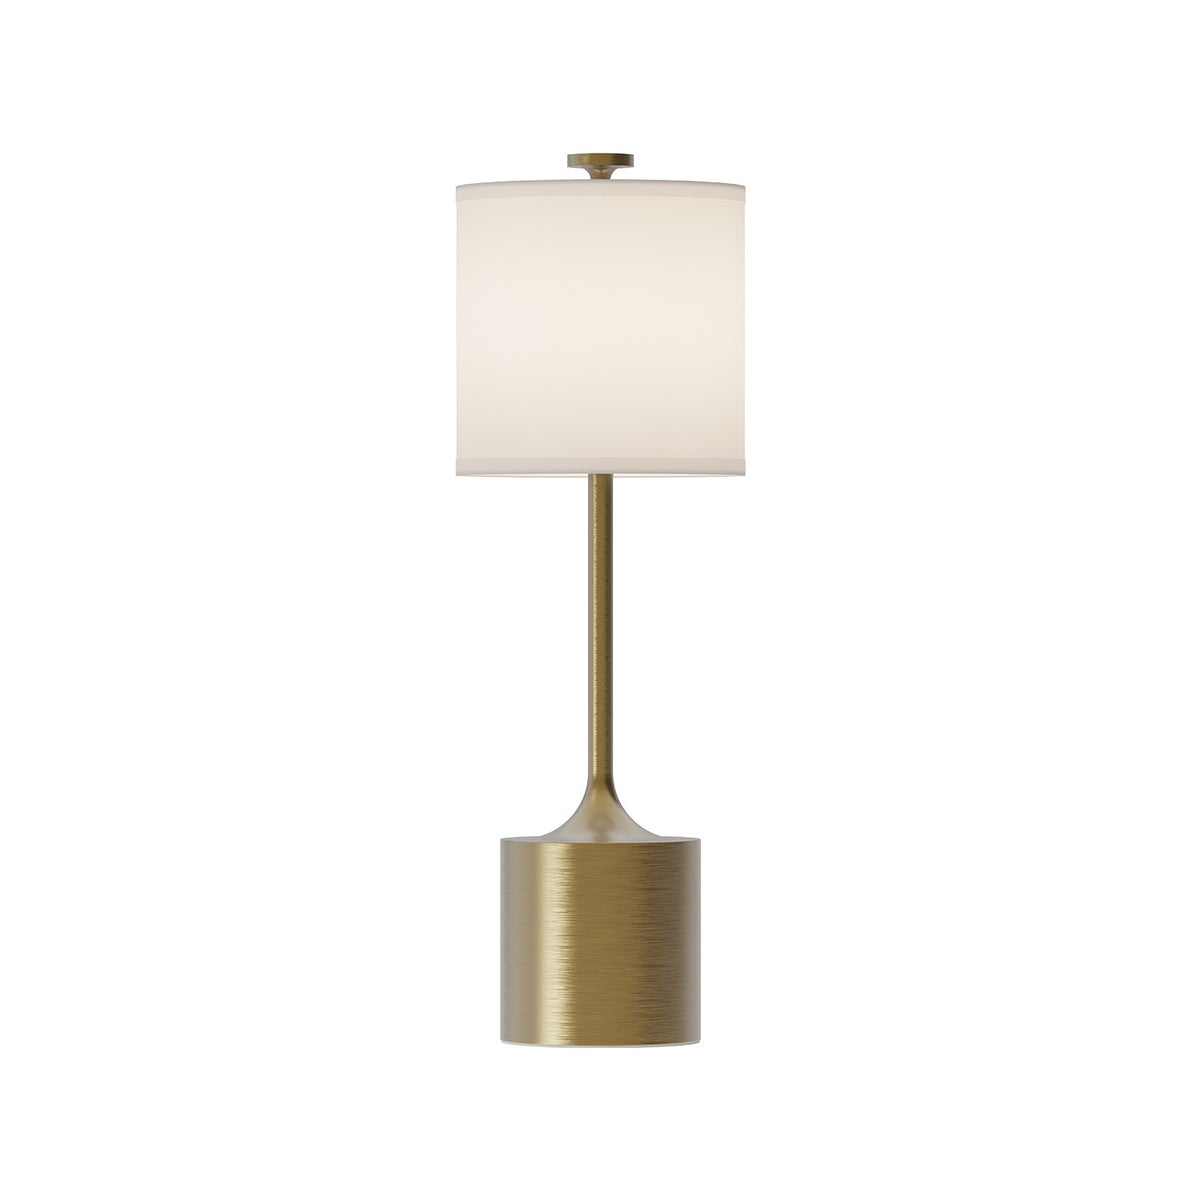 Alora Canada - TL418726BGIL - One Light Table Lamp - Issa - Brushed Gold/Ivory Linen